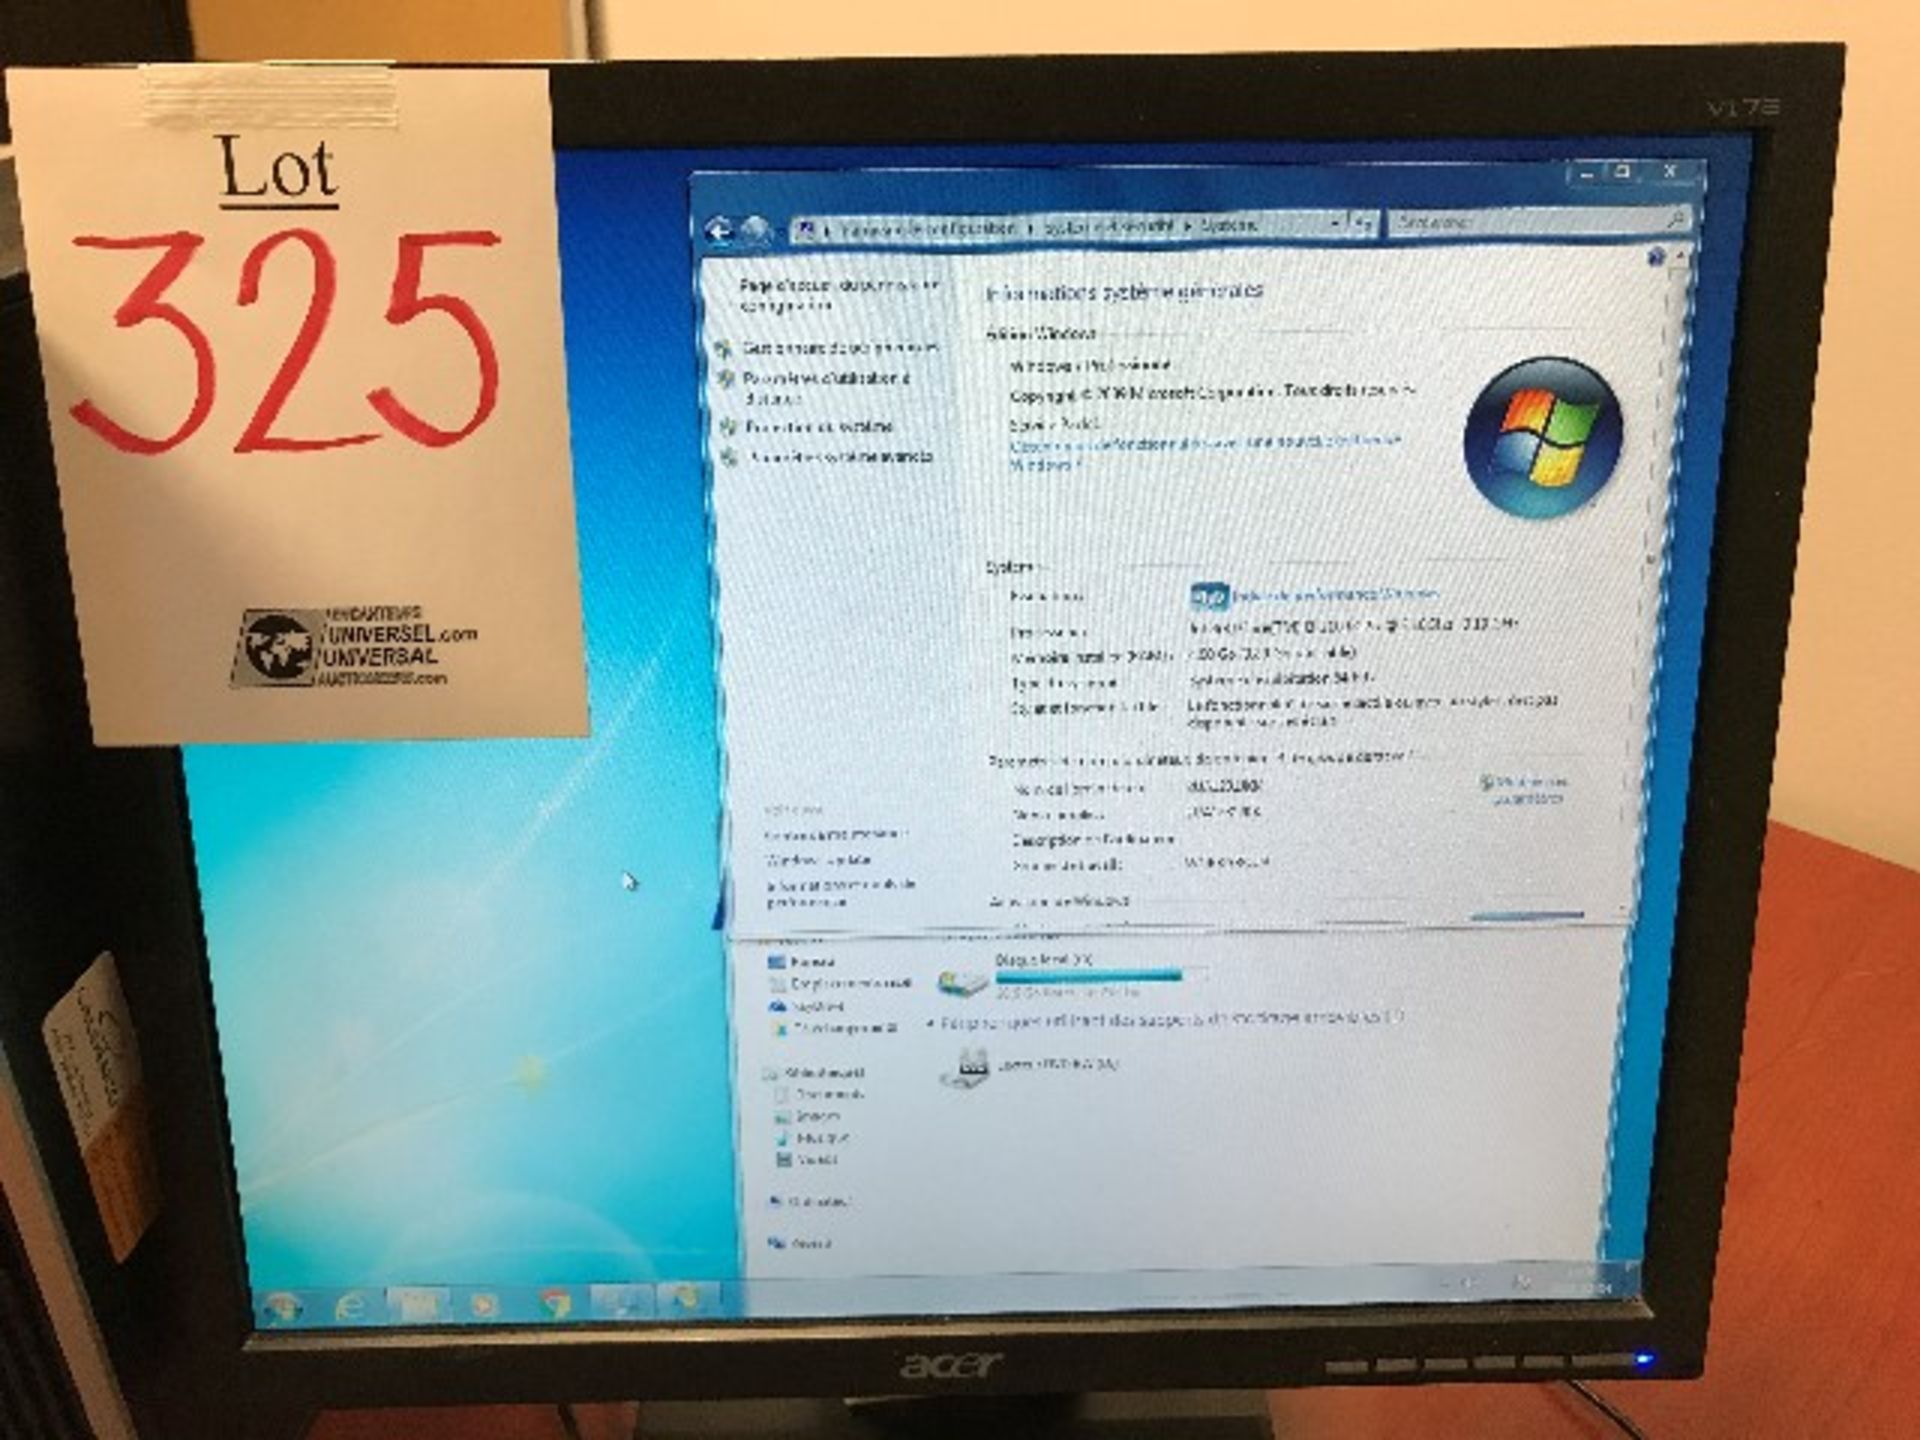 HP i3,3.1GHz,4GB RAM,232GB HDD,monitor,keyboard,mouse - Image 3 of 3